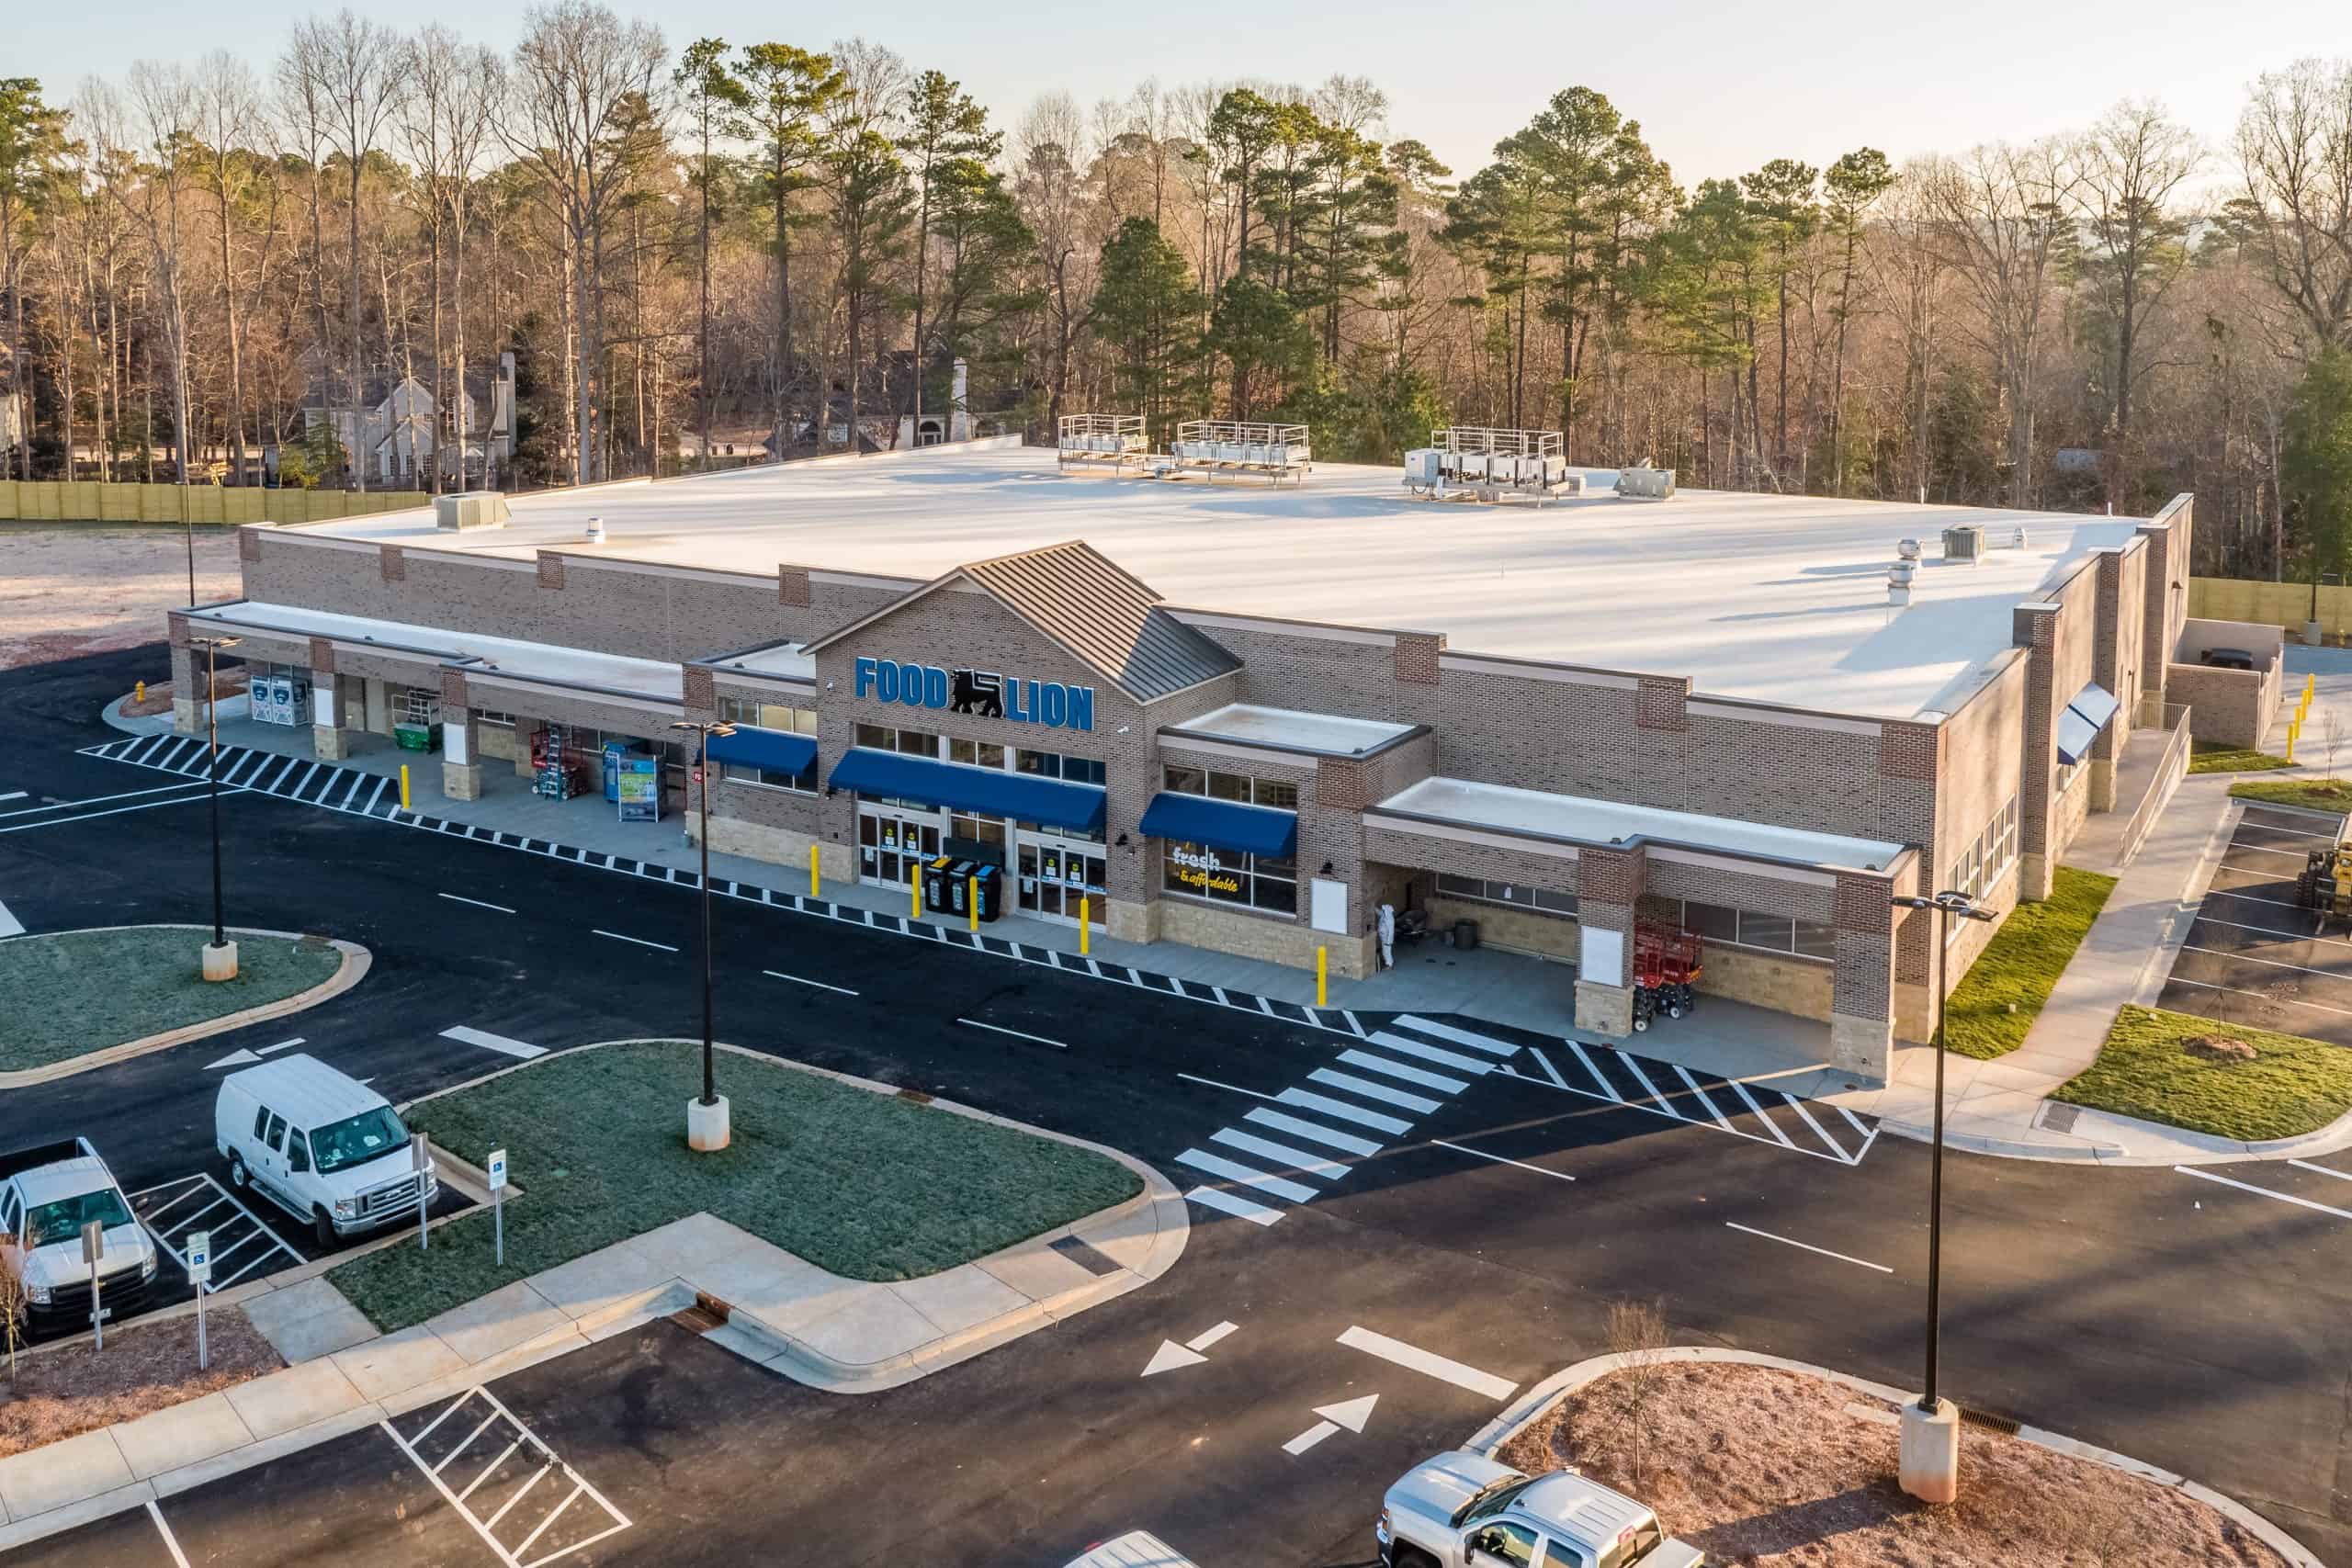 WIMCO Corporation | Food Lion, Wake Forest, NC